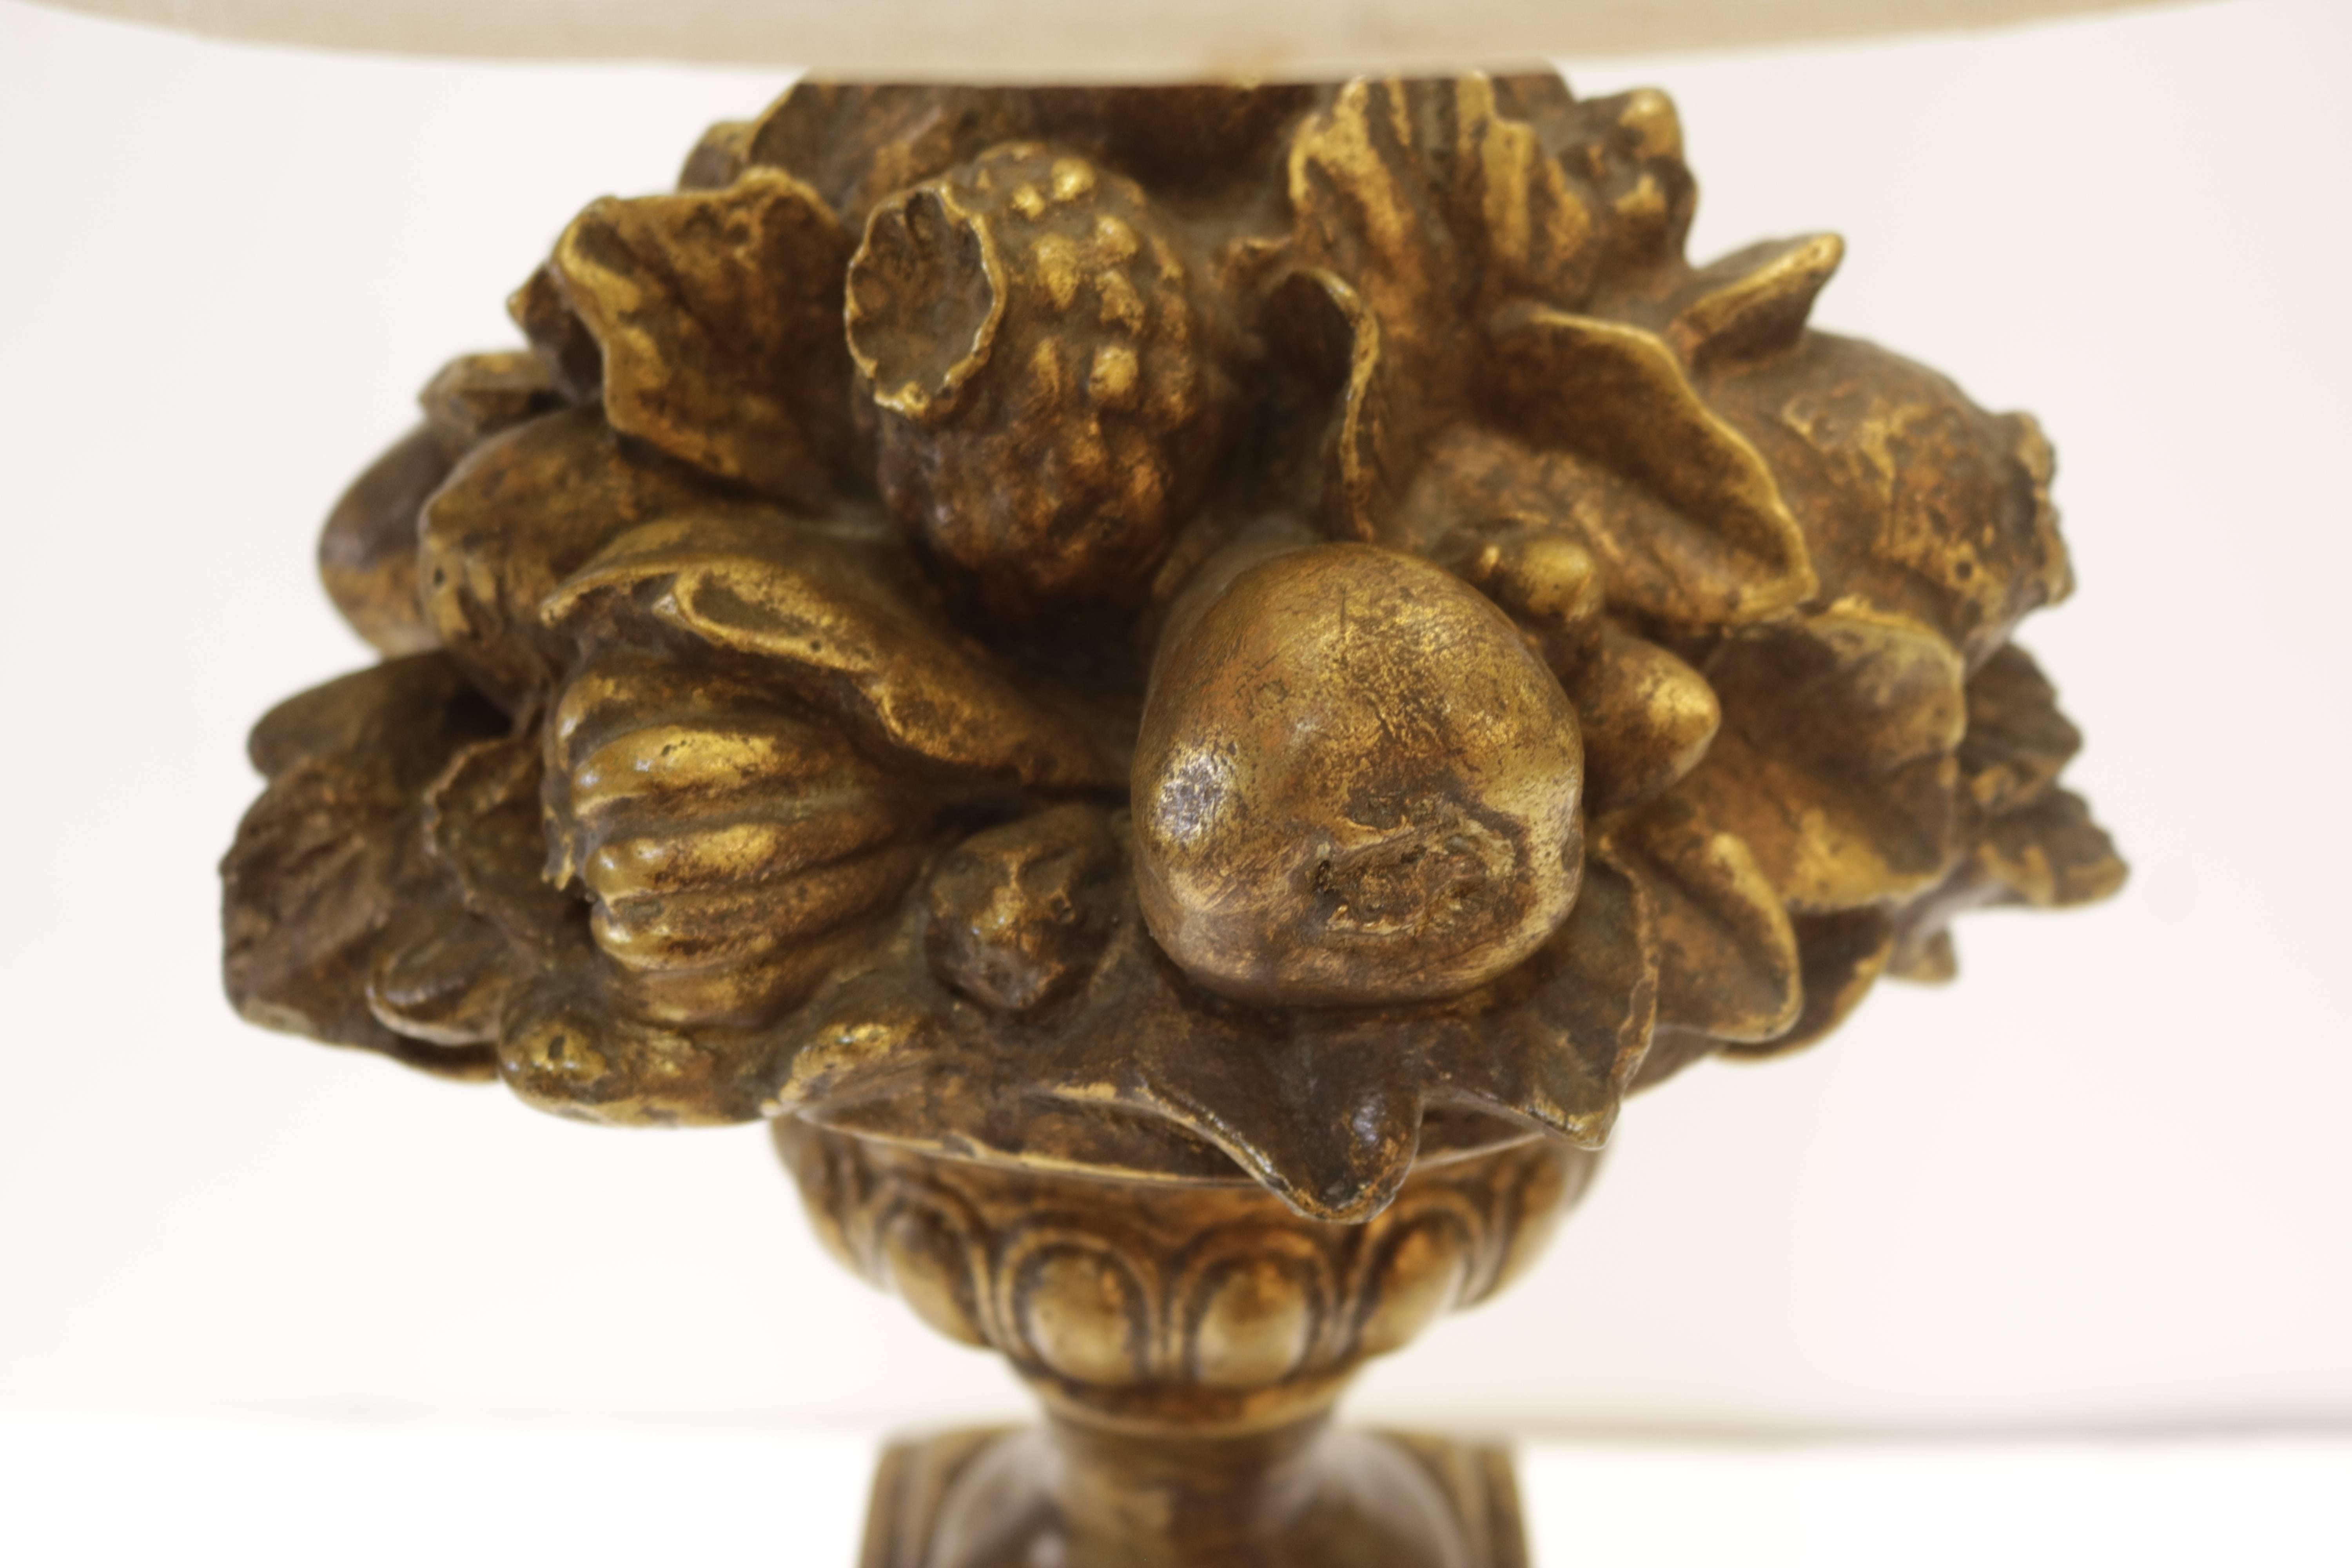 Slim original gilded wood table lamp has various fruits and flowers carved and retains its original off-white silk shade which is in excellent condition.

As pictured with shade, the lamp measures 9.0